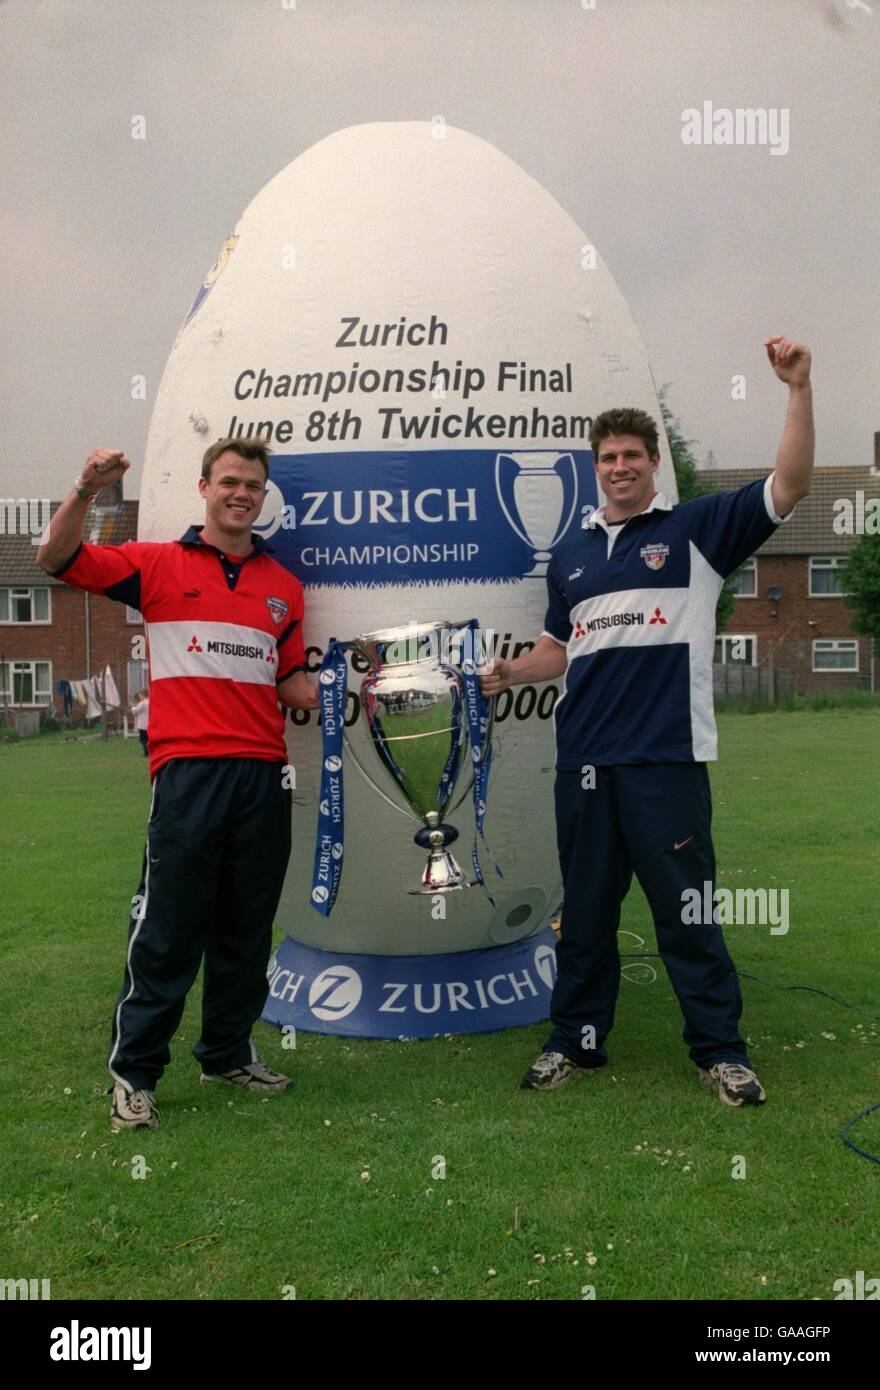 Bristol's Ross Beattie (r) and Phil Christophers (l) hold the Zurich Championship Trophy Stock Photo